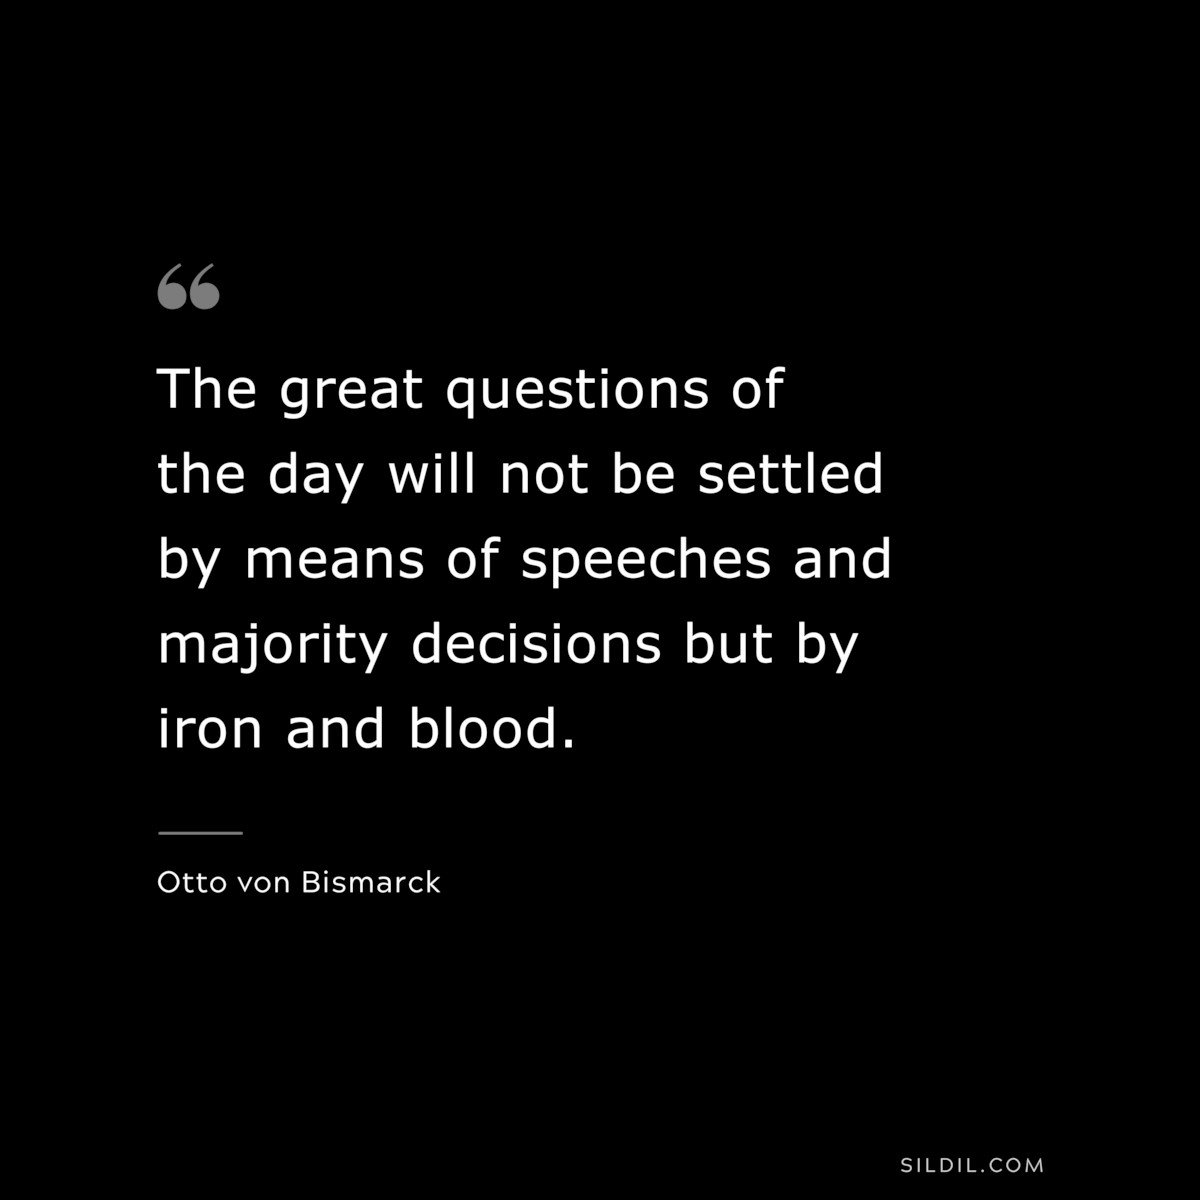 The great questions of the day will not be settled by means of speeches and majority decisions but by iron and blood. ― Otto von Bismarck